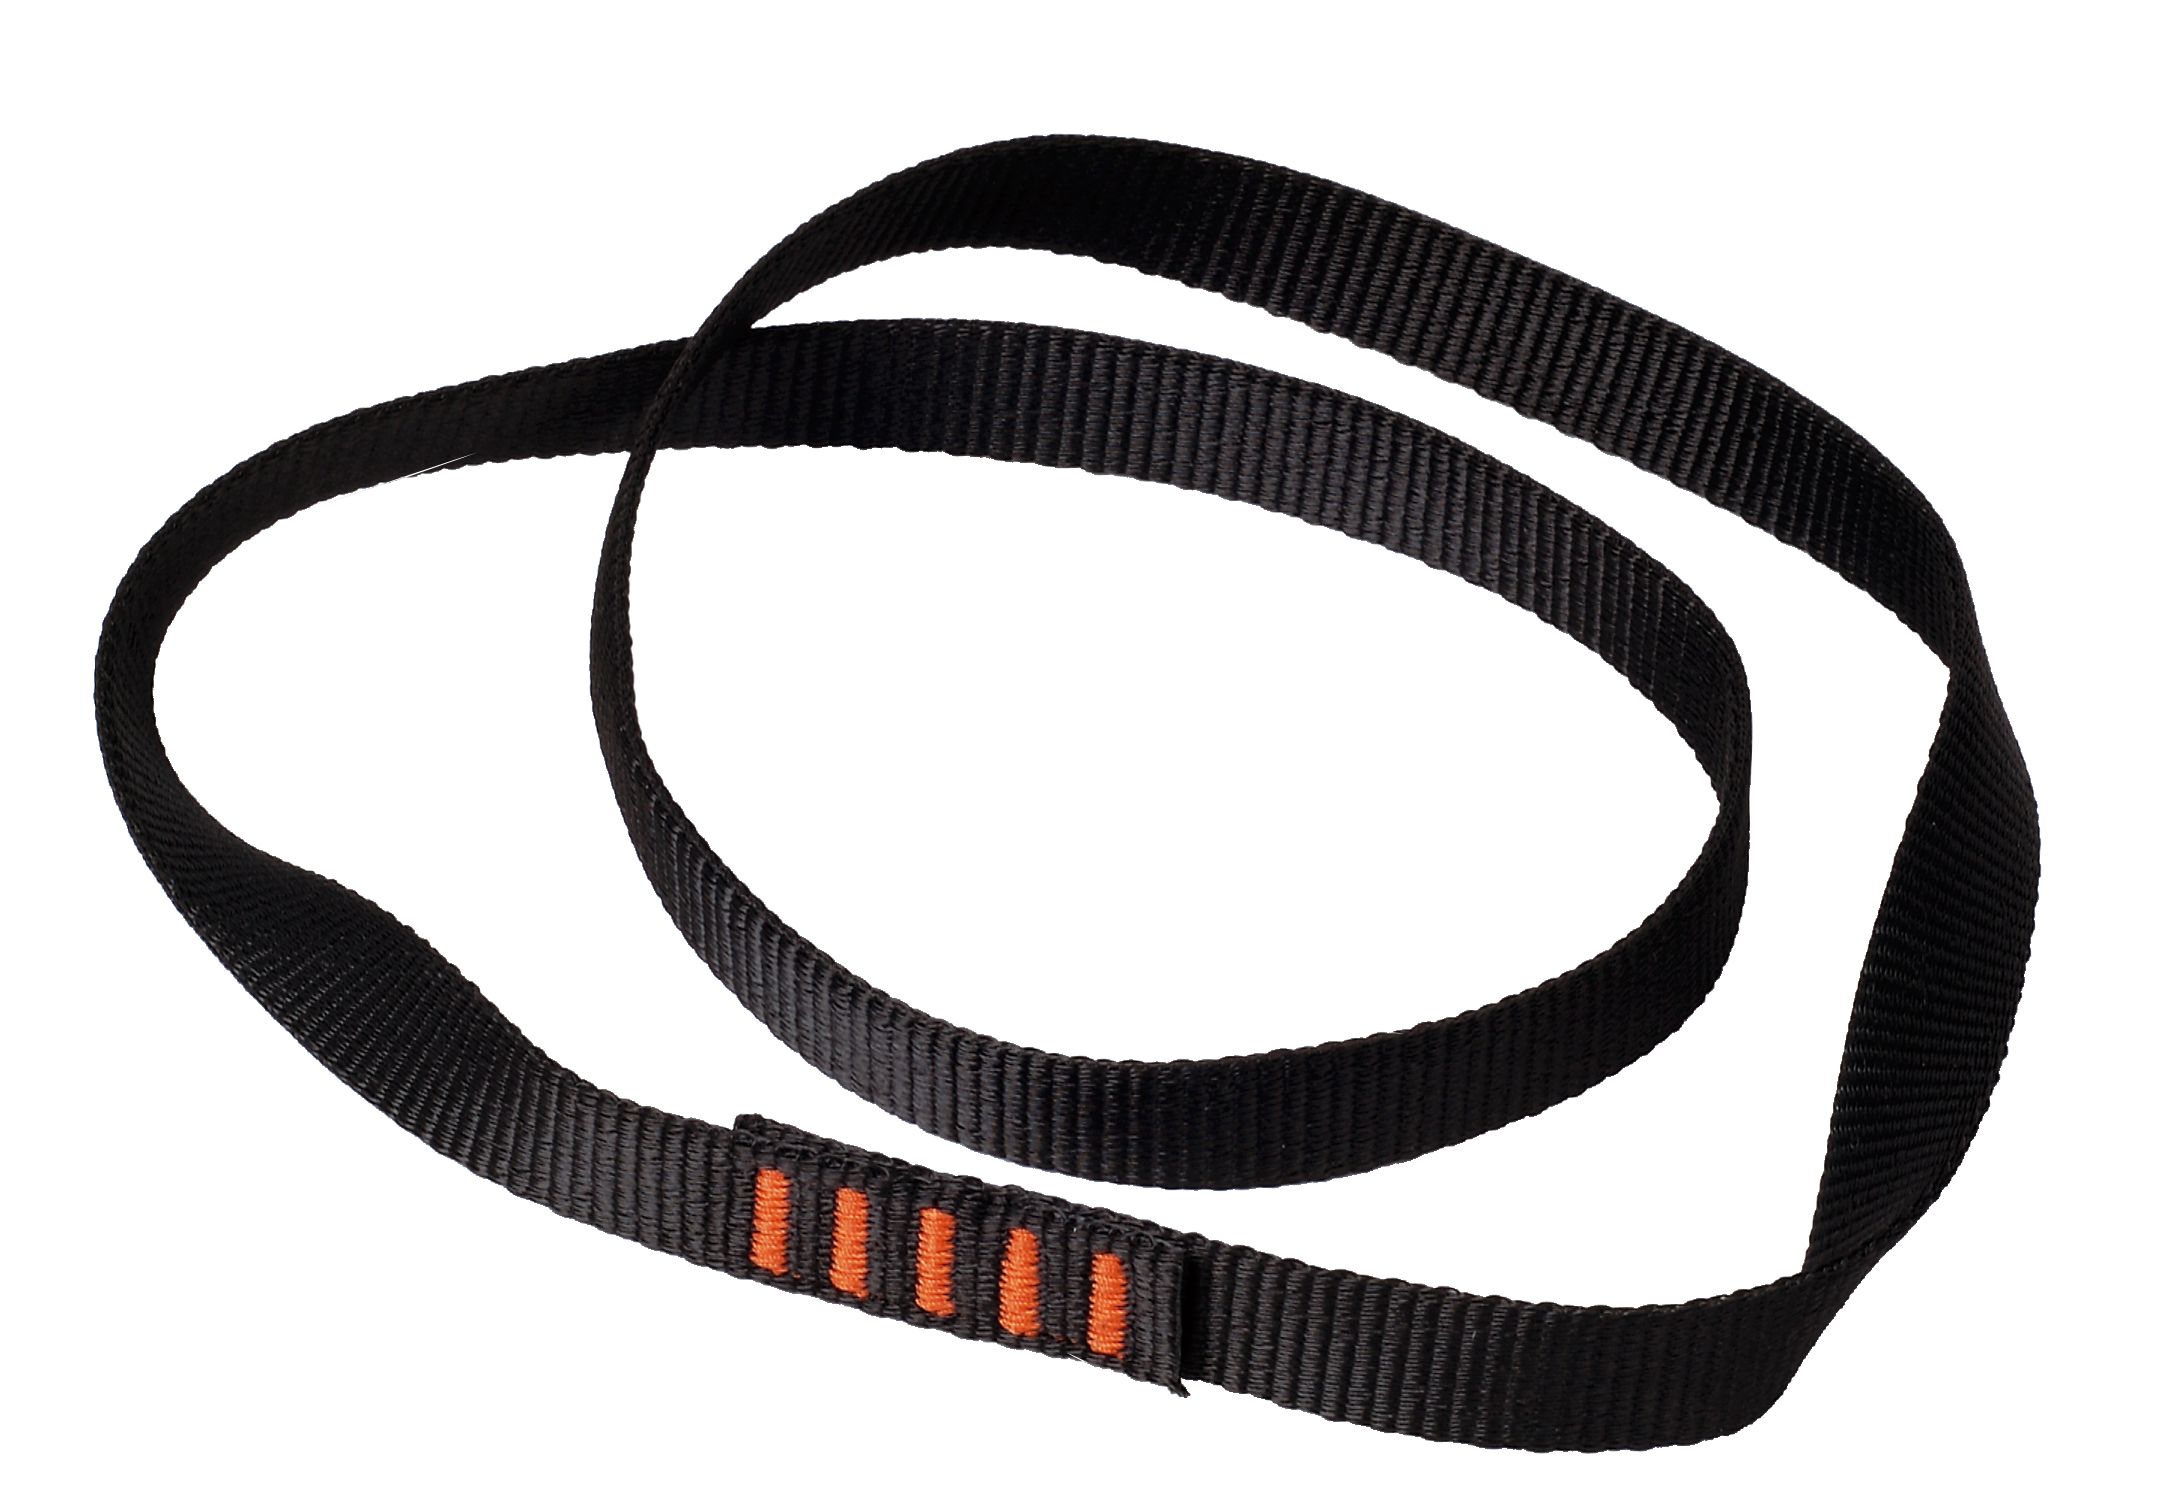 Tractel 1m Anchor Strap 10kN, 19mm wide